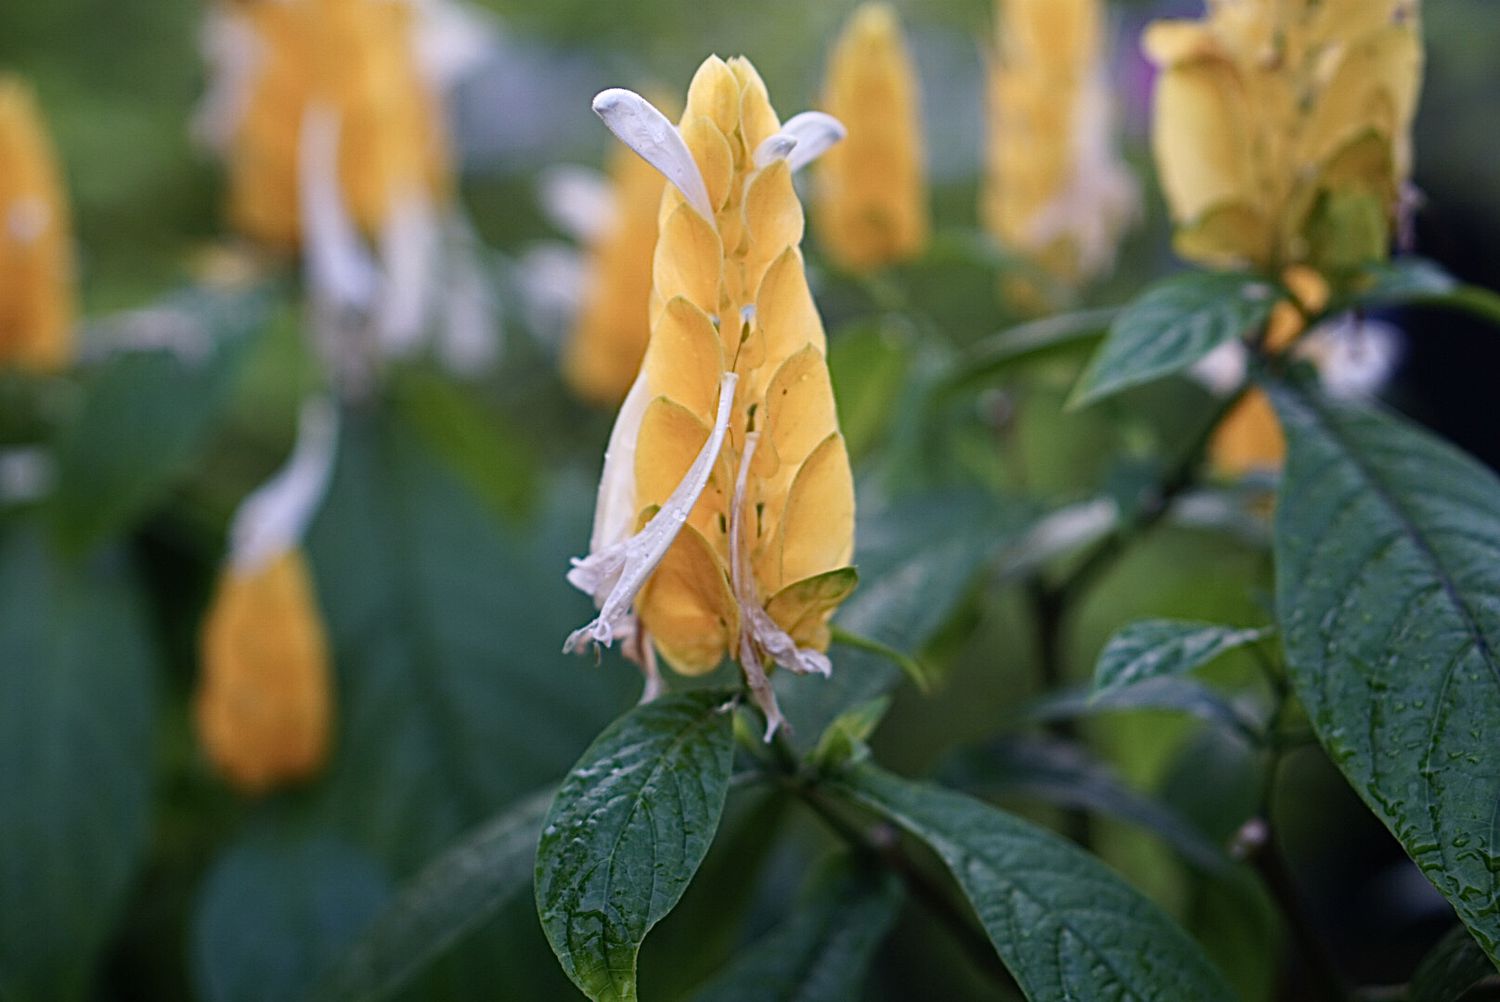 Golden shrimp plant with small white wispy petals and yellow cone-shaped stamen closeup